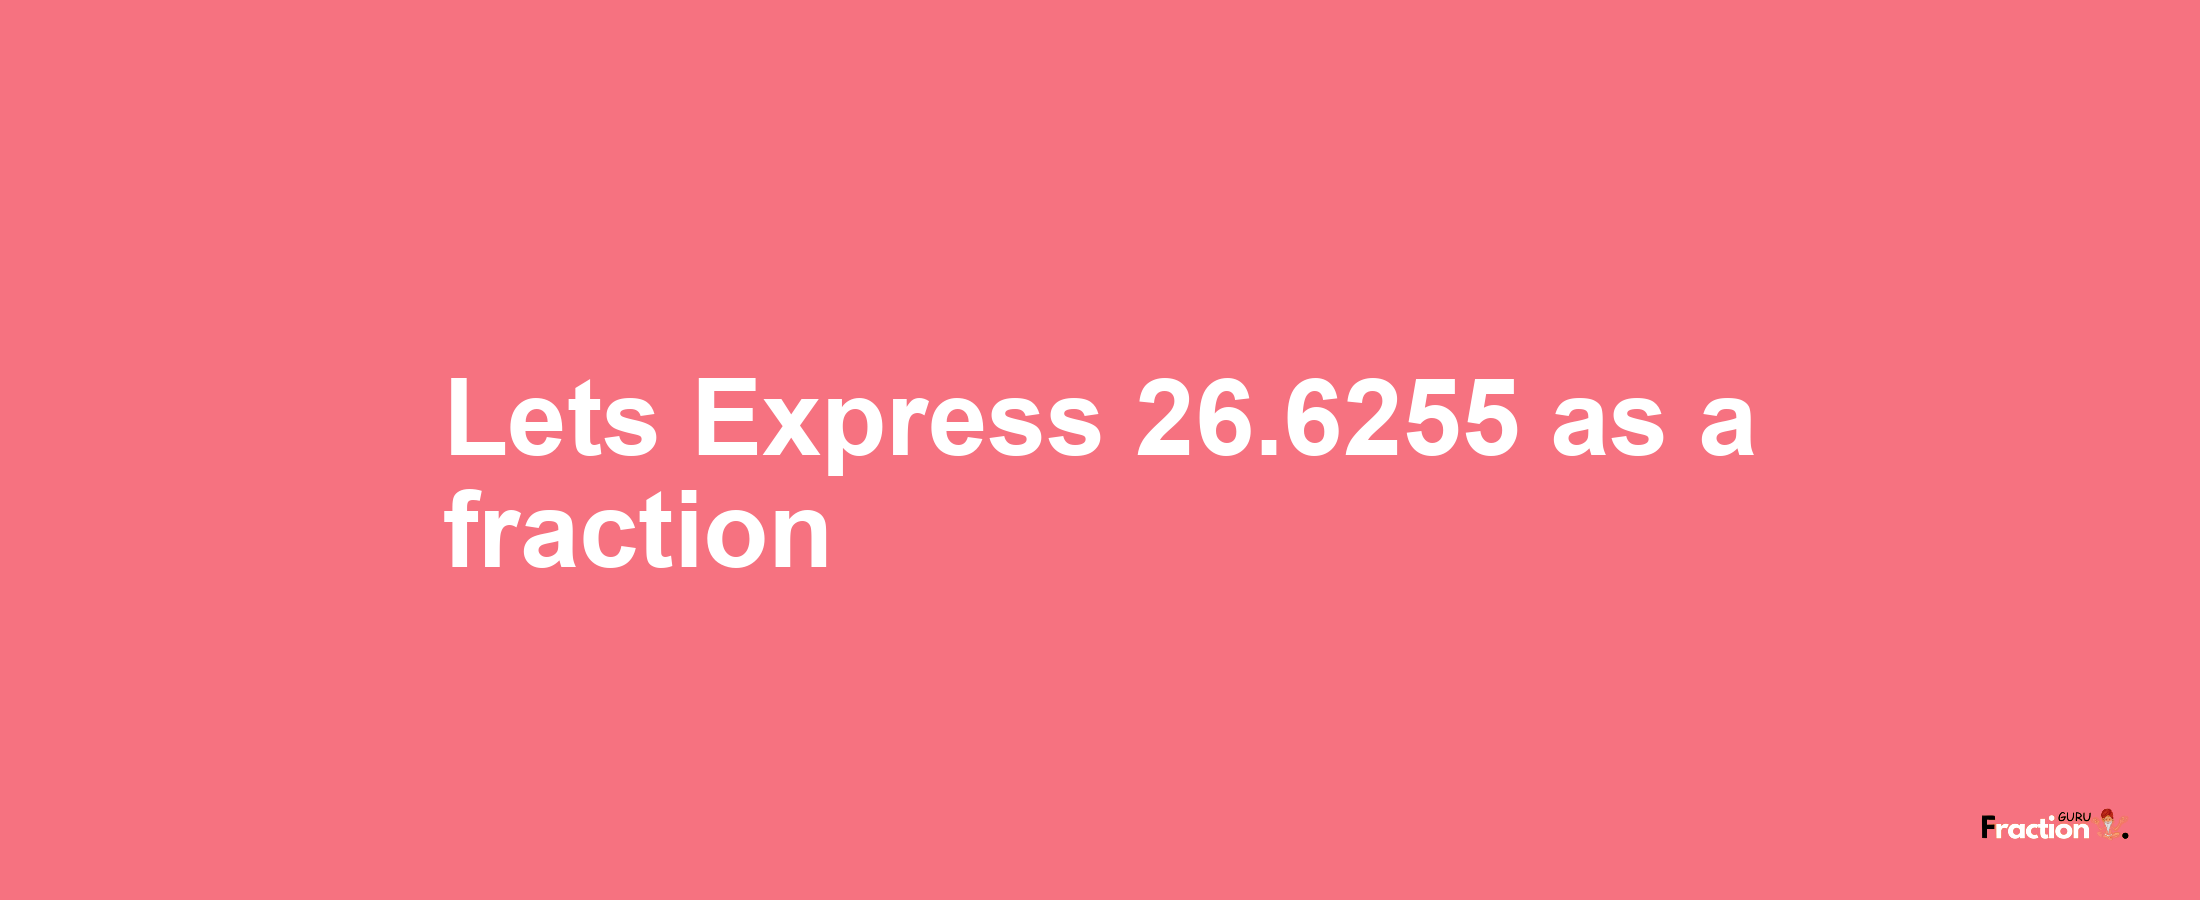 Lets Express 26.6255 as afraction